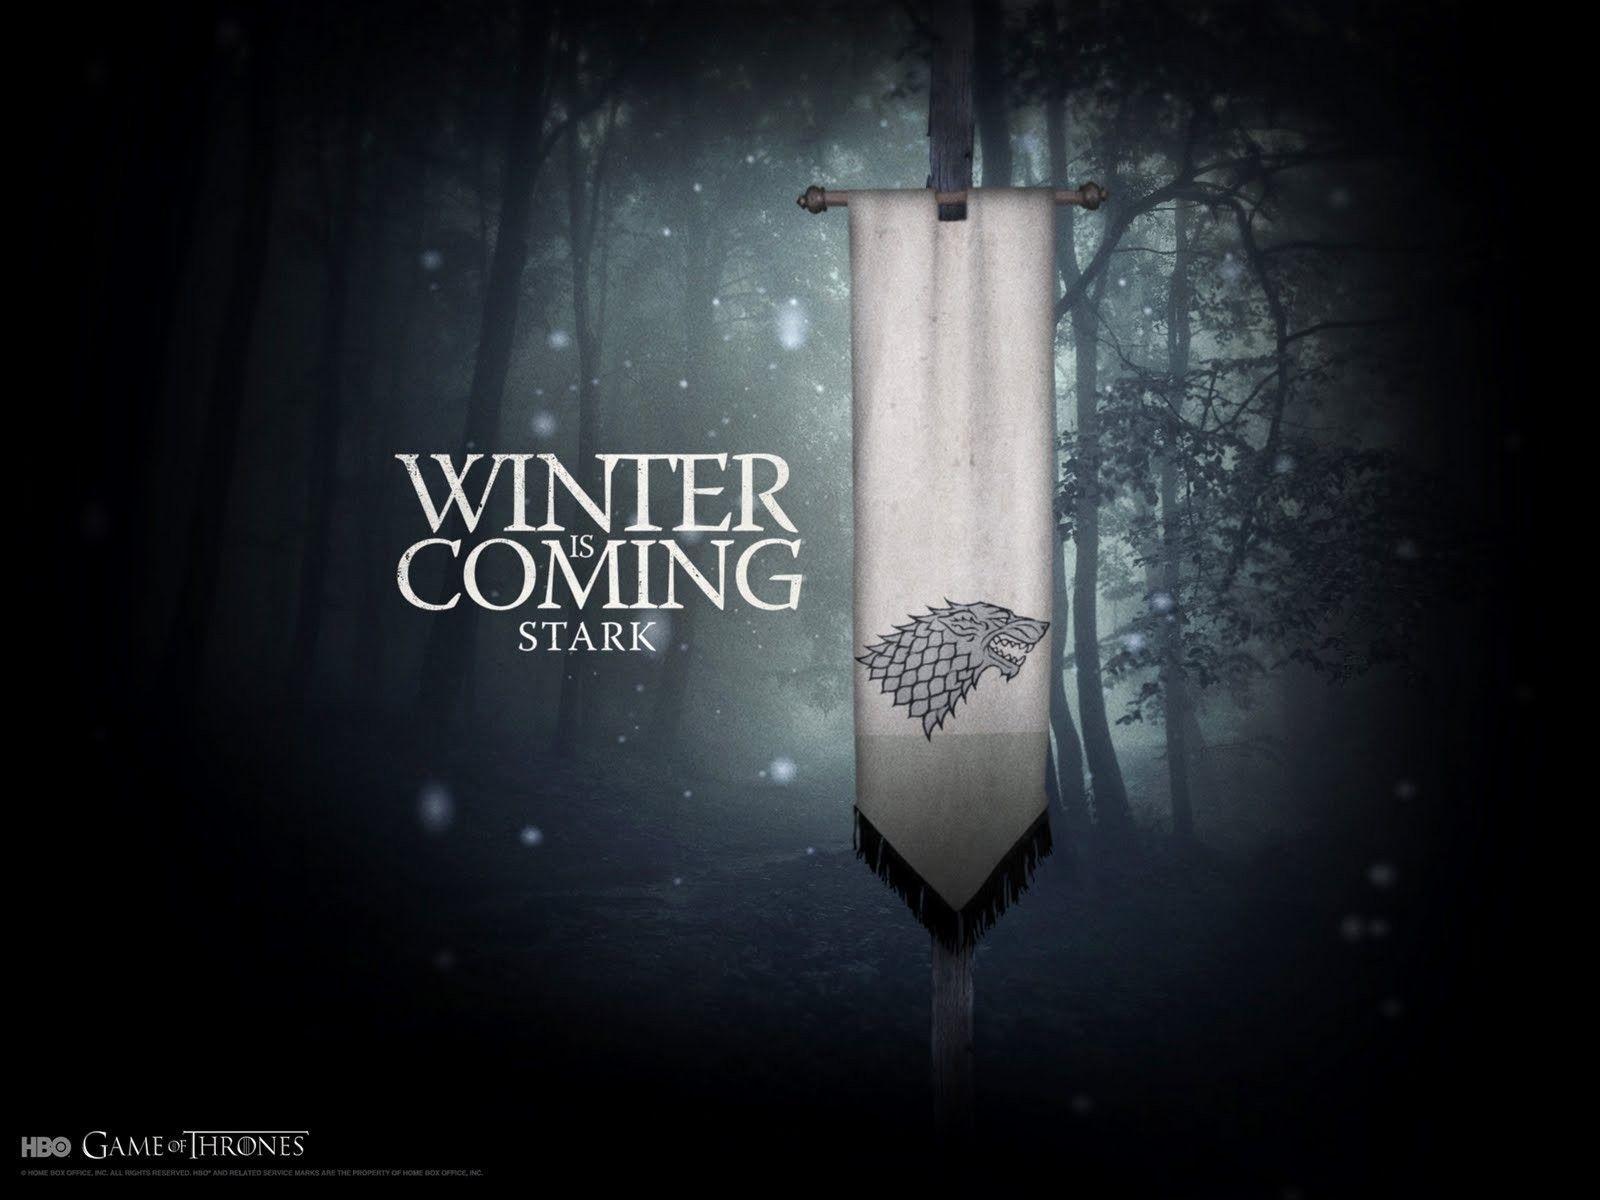 HBO Game of Thrones Wallpaper Free HBO Game